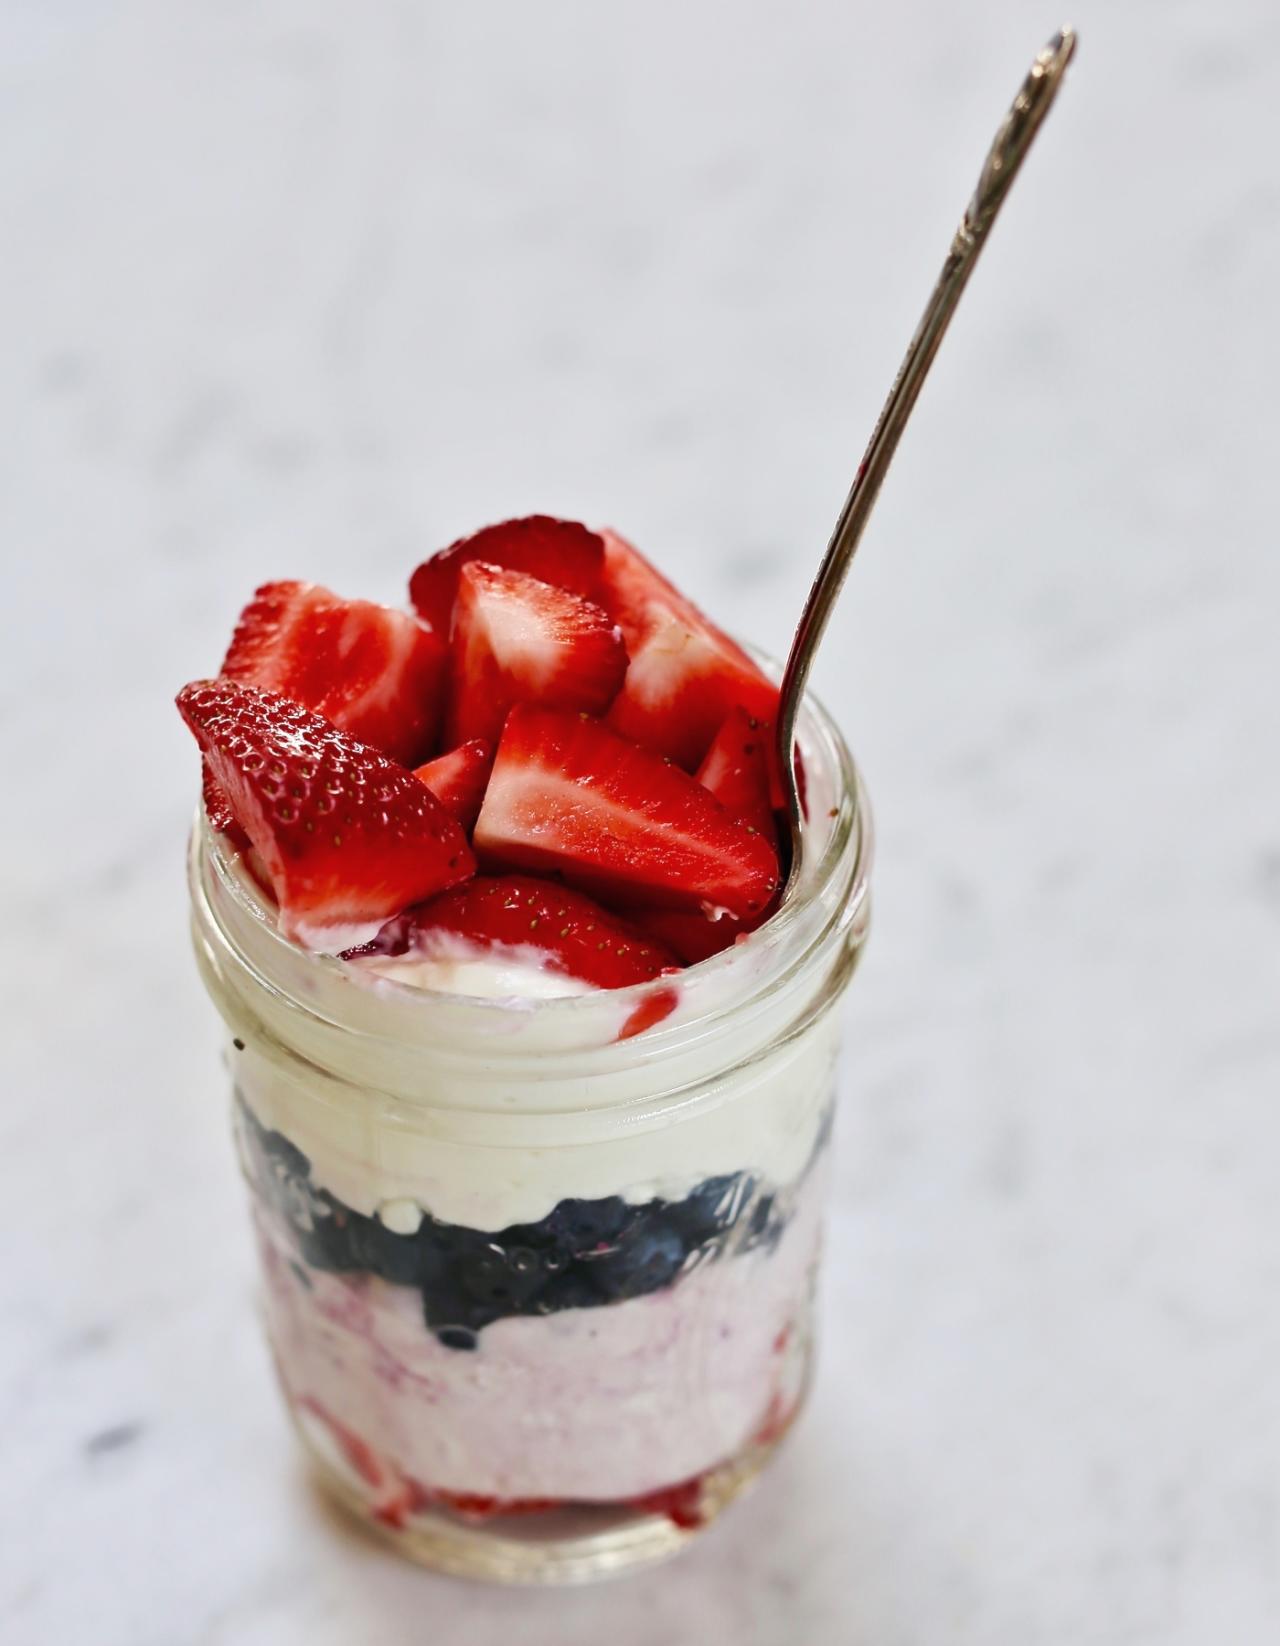 justbobbi_Diary_SuperfoodParfait_Featured